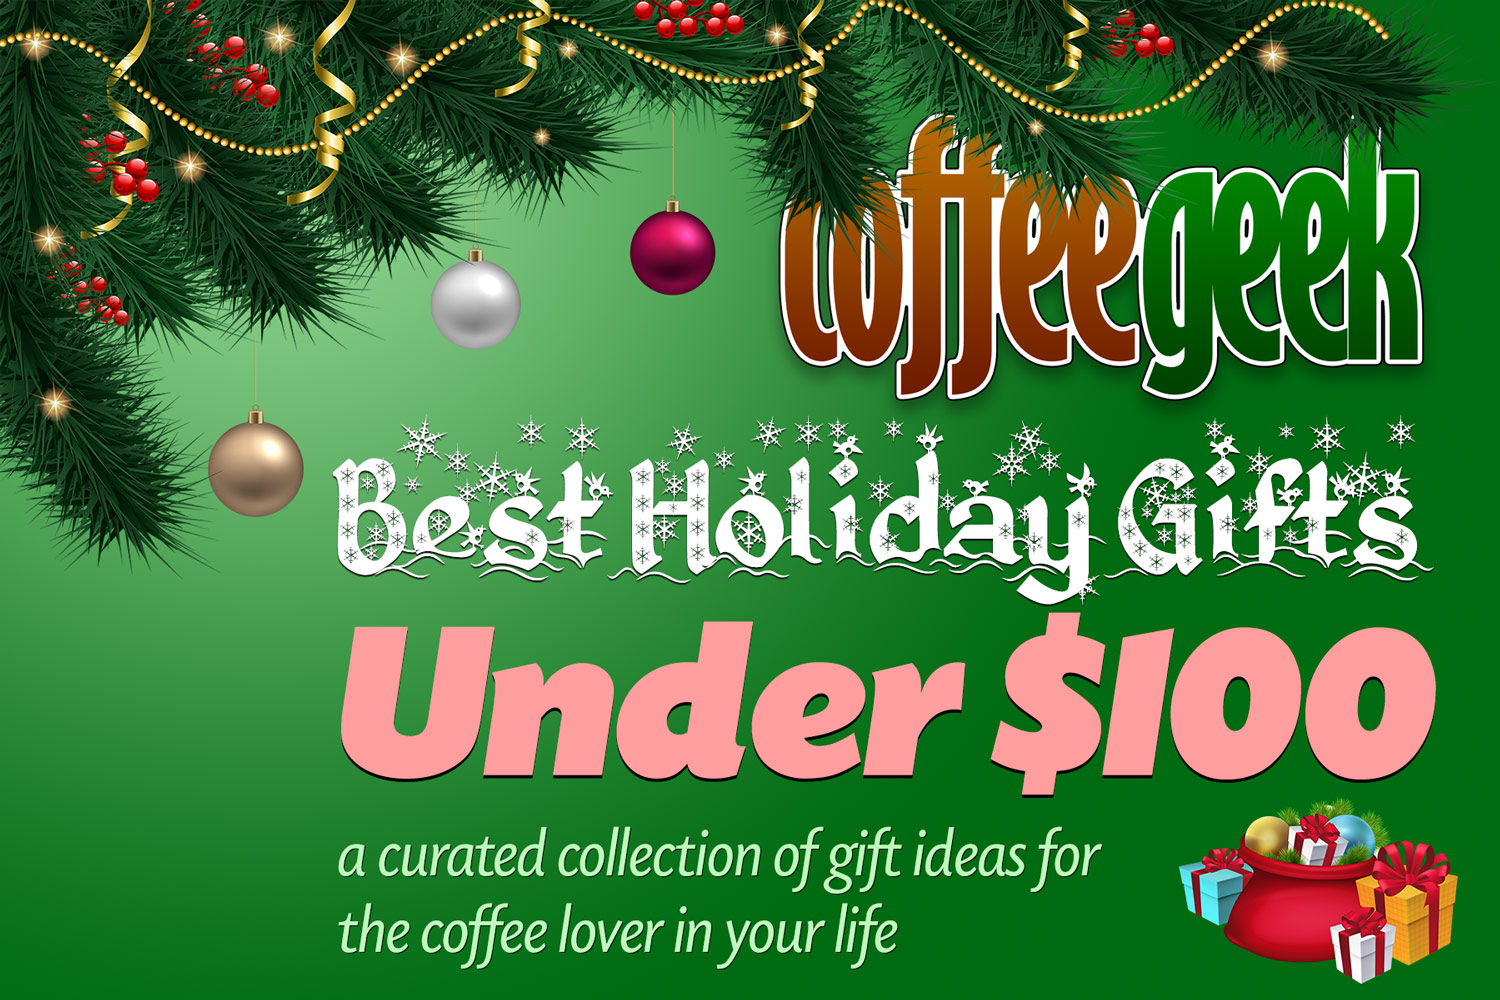 Gifts Under $100, Holiday Gifts